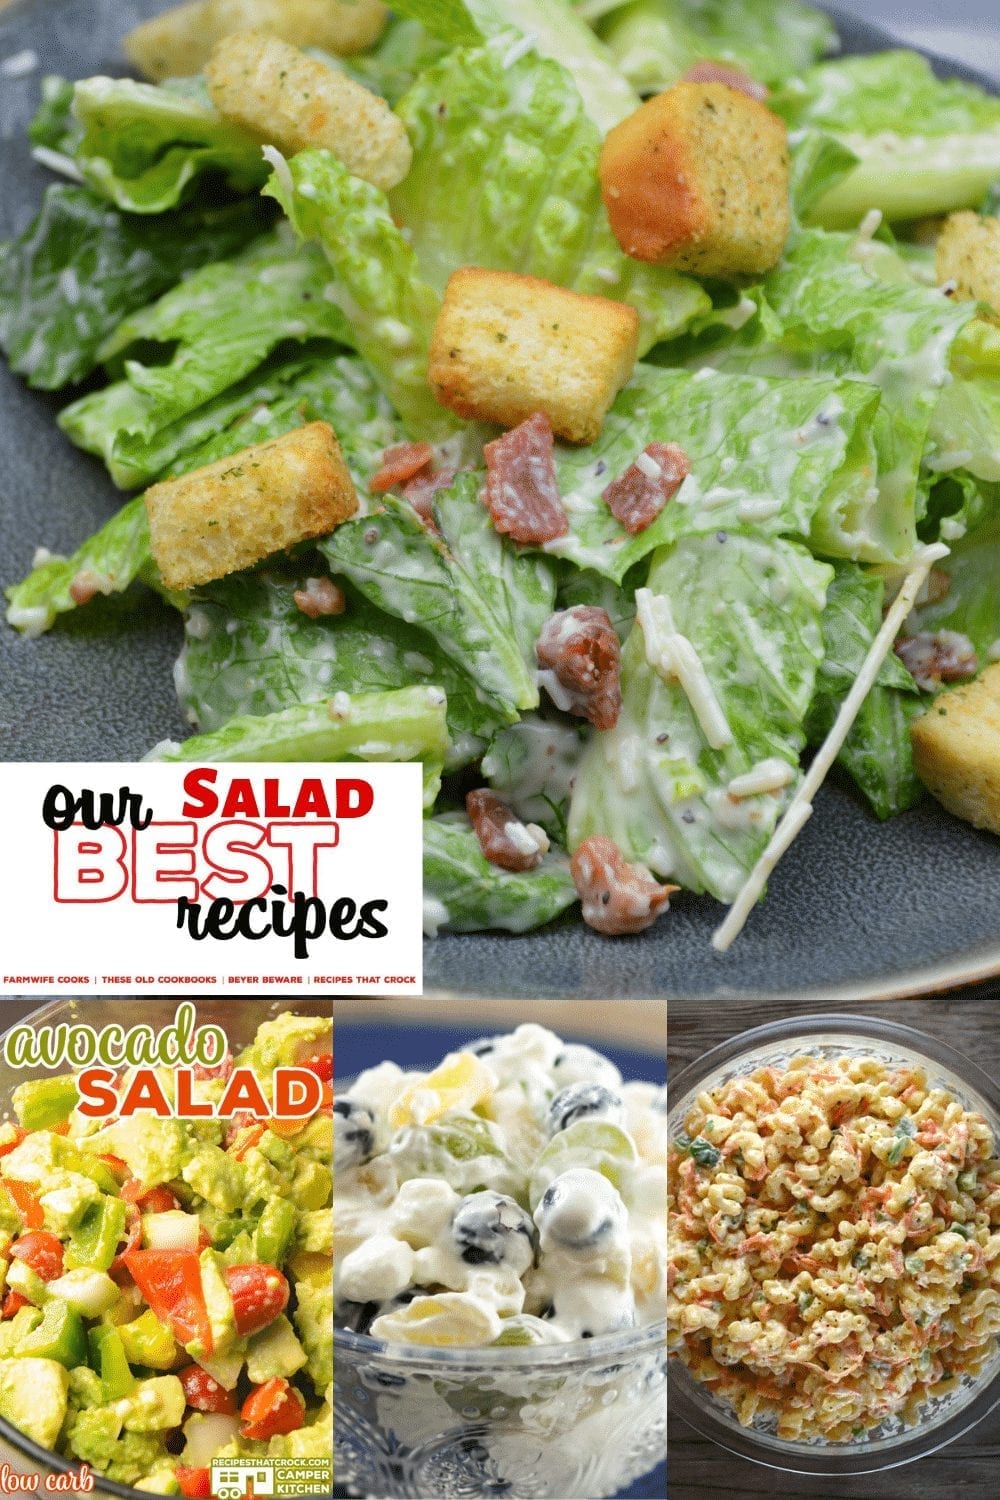 This edition of our best recipes is the best salad recipes from lettuce salads to pasta salads to fruit salads. If you are looking for the best salad recipes, don't miss a single one of our best salad recipes. #Salads #OurBestRecipes #EasyRecipes